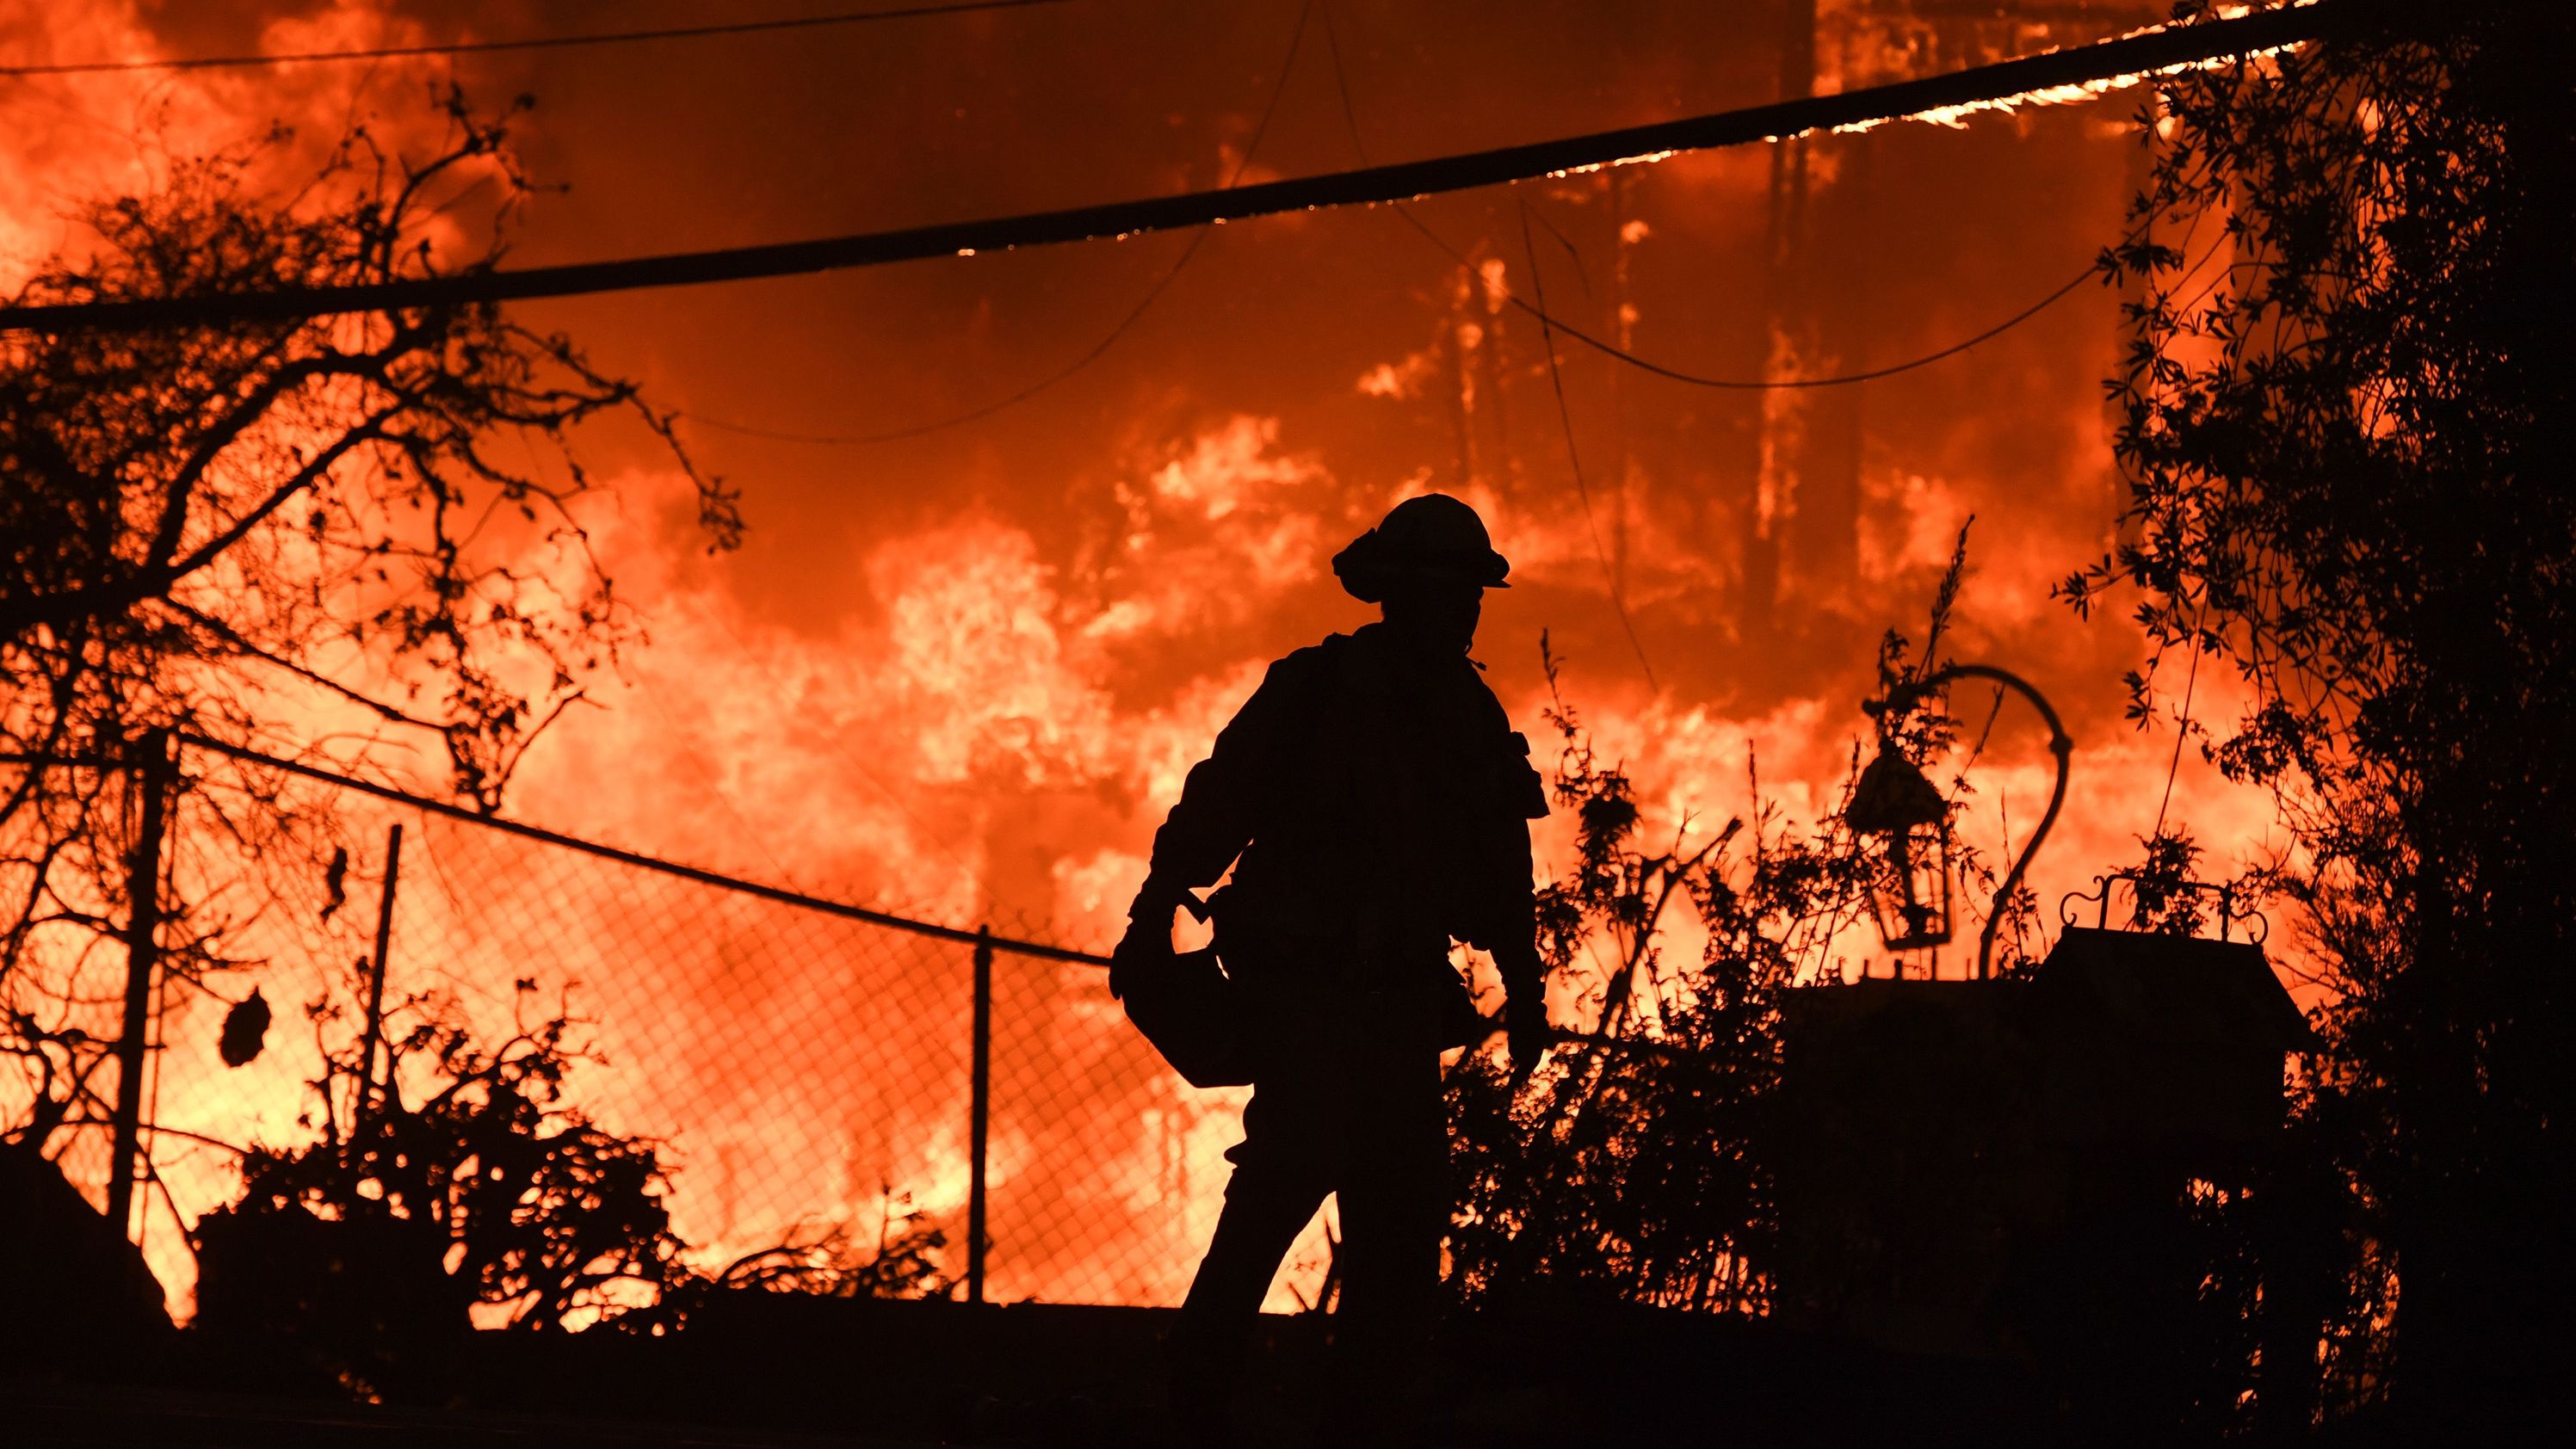 A firefighter is silhouetted by a burning home along the Pacific Coast Highway during the Woolsey Fire on November 9, 2018, in Malibu, California.